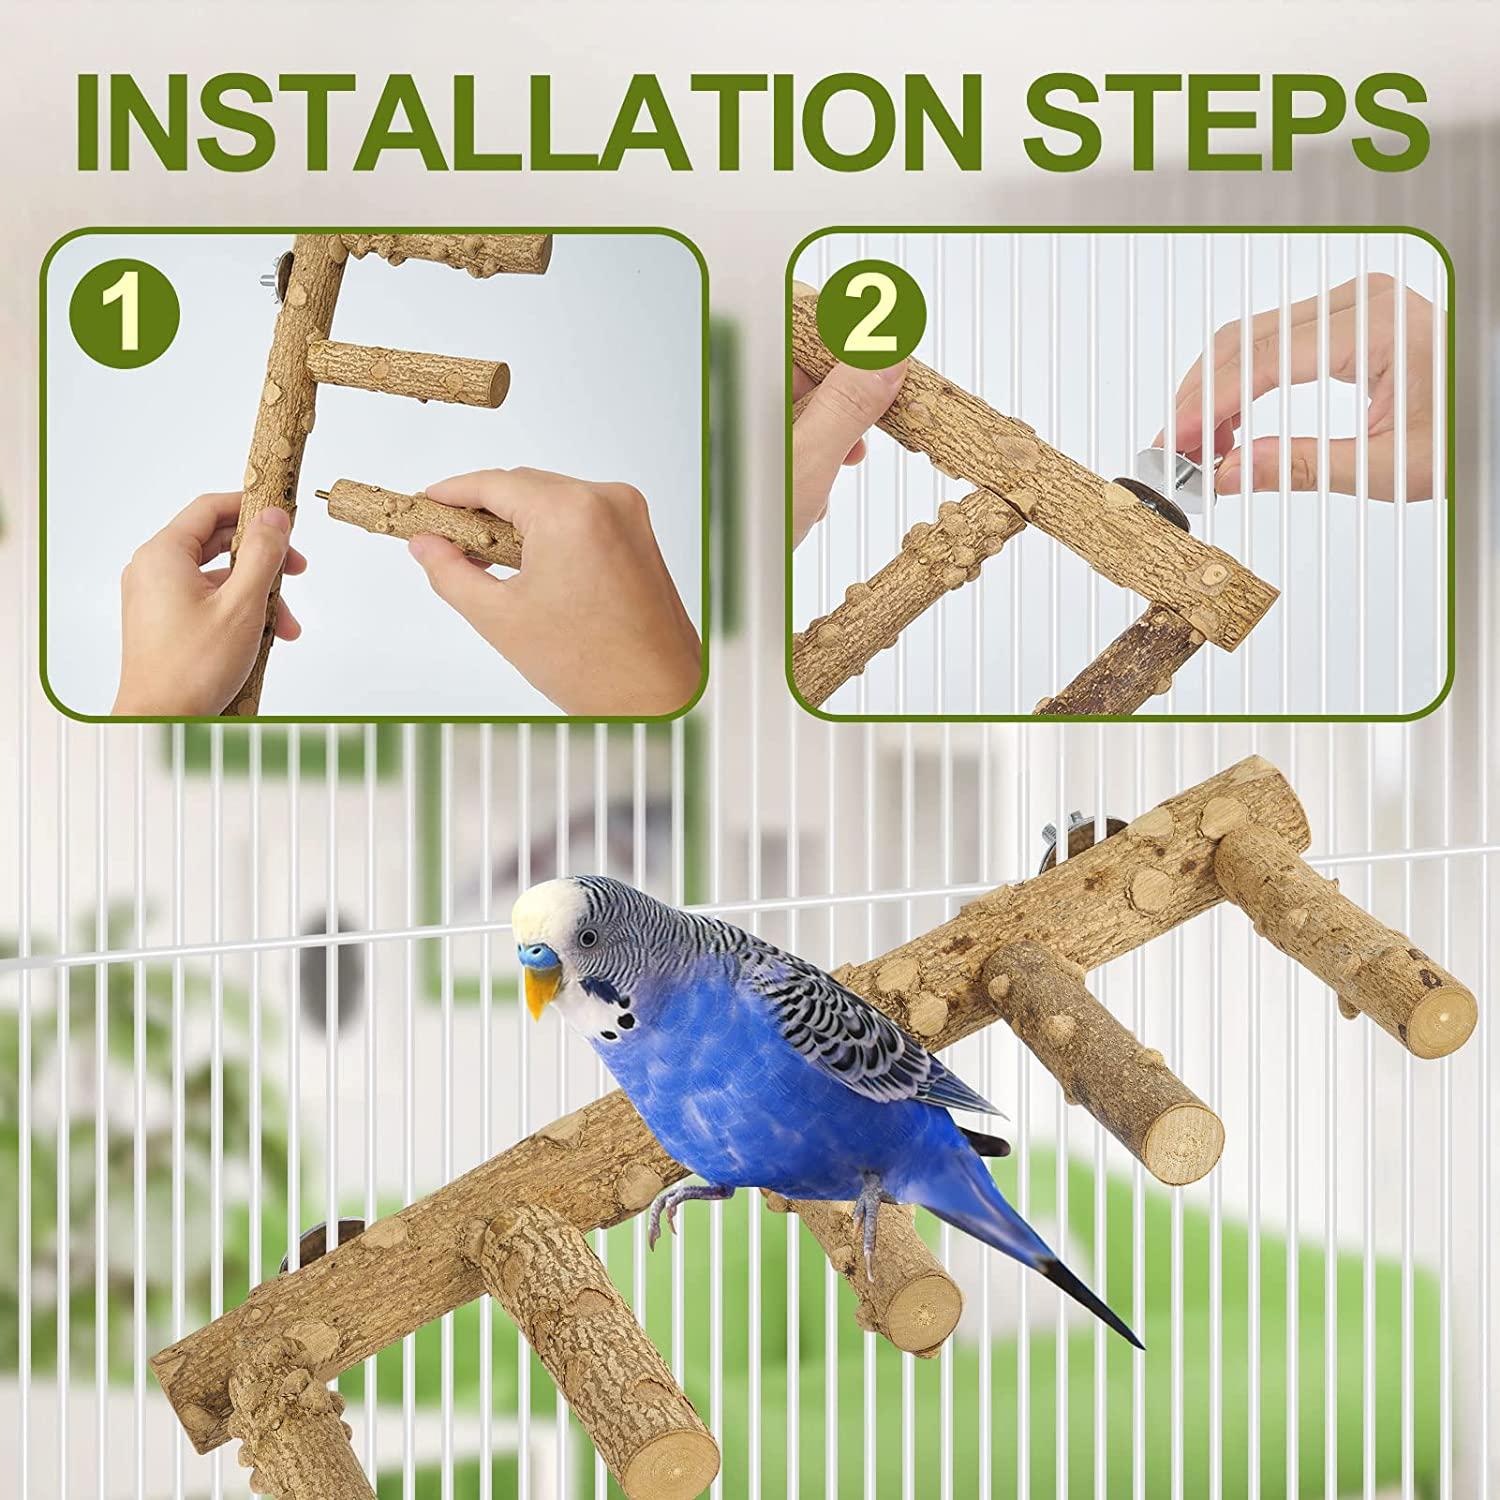 LIMIO 4 Pack Bird Parrot Swing Bird Ladder Natural Wood Bird Perch Bird  Cage Toys Suitable for Small Parakeets, Cockatiels, Conures,  Finches,Budgie,Macaws, Parrots, Love Birds